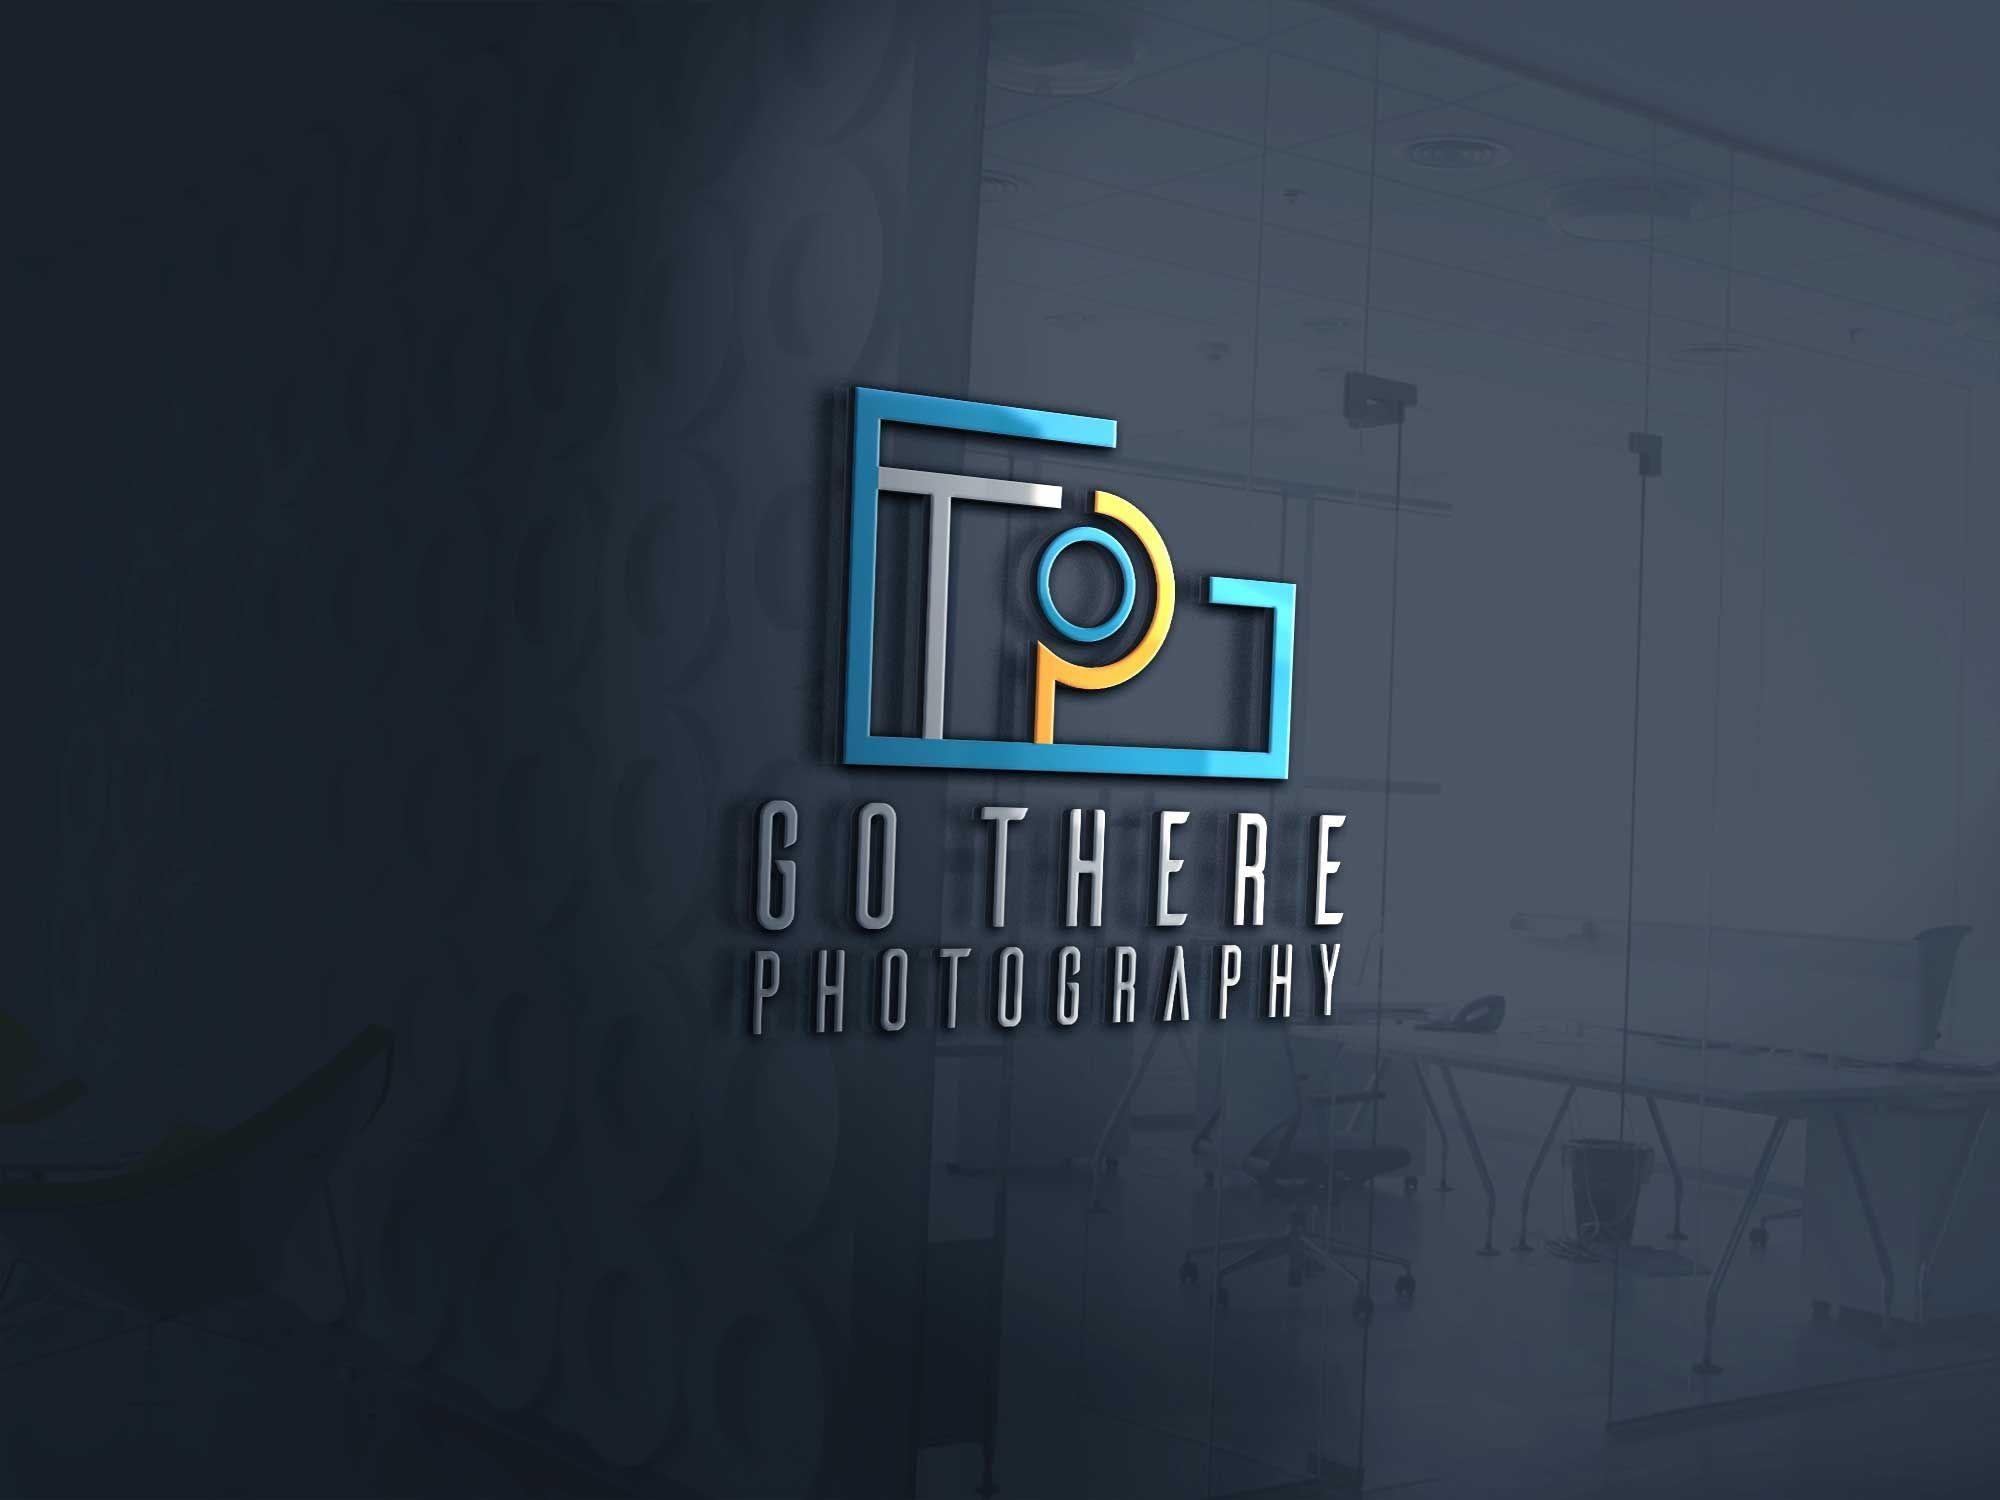 Cool Unique Logo - Unique Logo Design for photography genre. Cool and eye catching icon ...